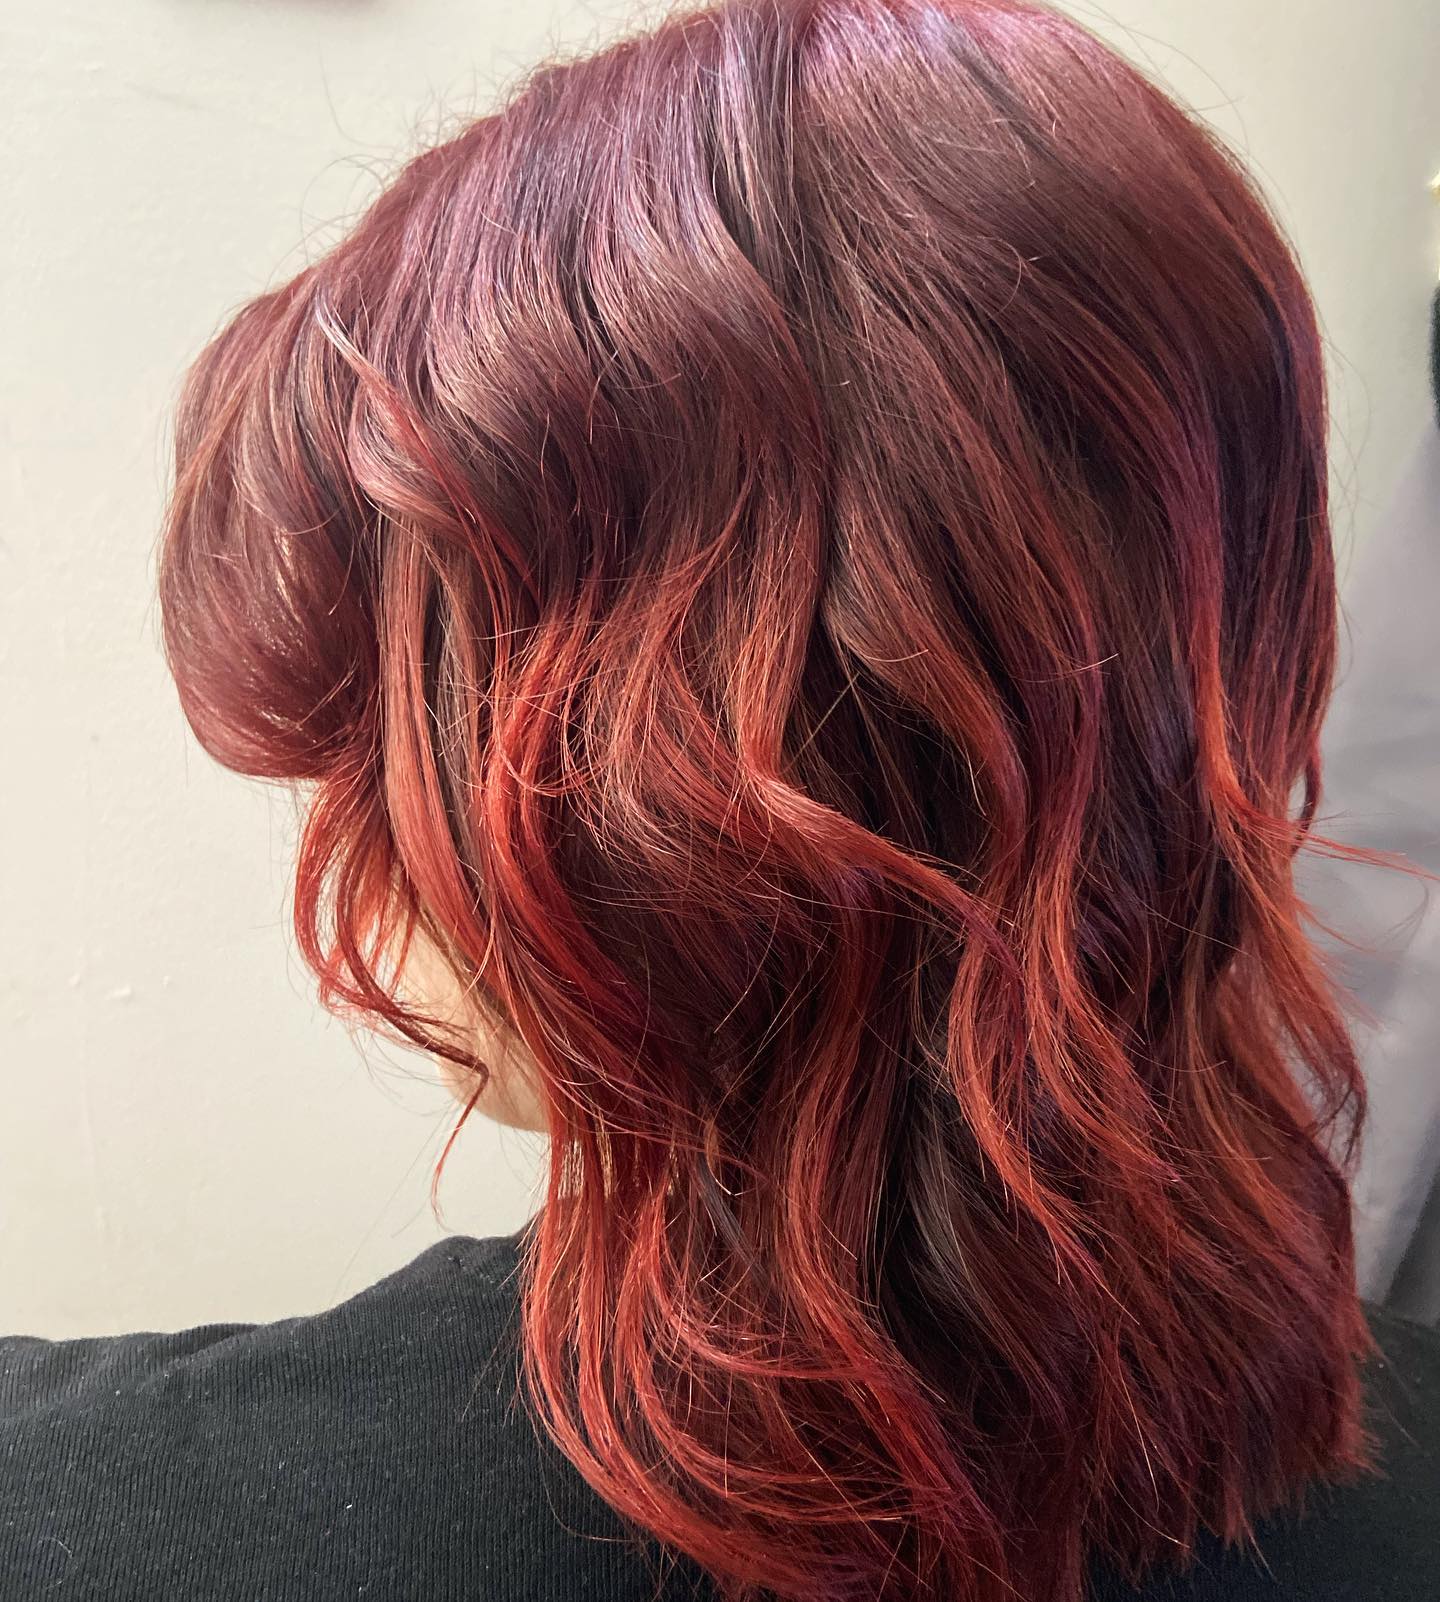 red ombre hair style 86 Natural red ombre hair | Red ombre background | Red ombre hair Red Ombre Hairstyles